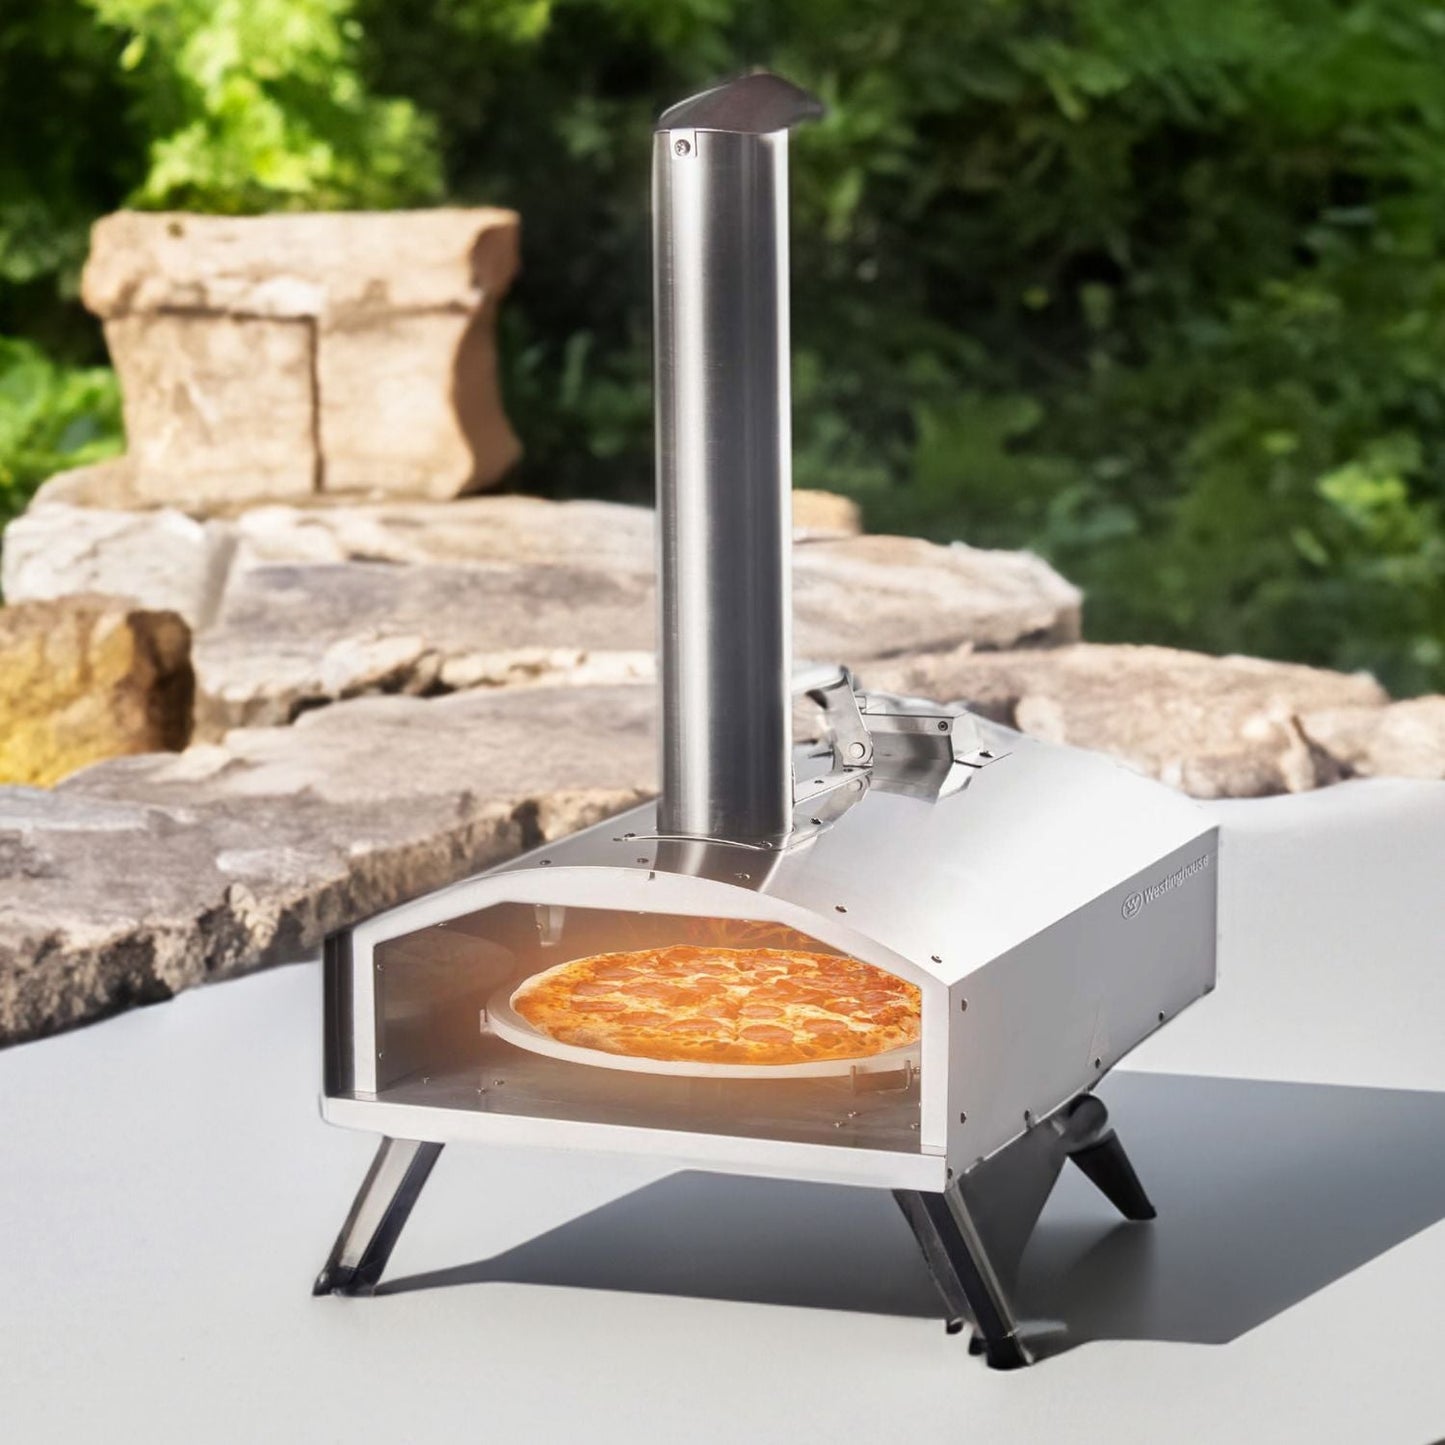 12" Wood Pellet Pizza Oven with Rotating Stone